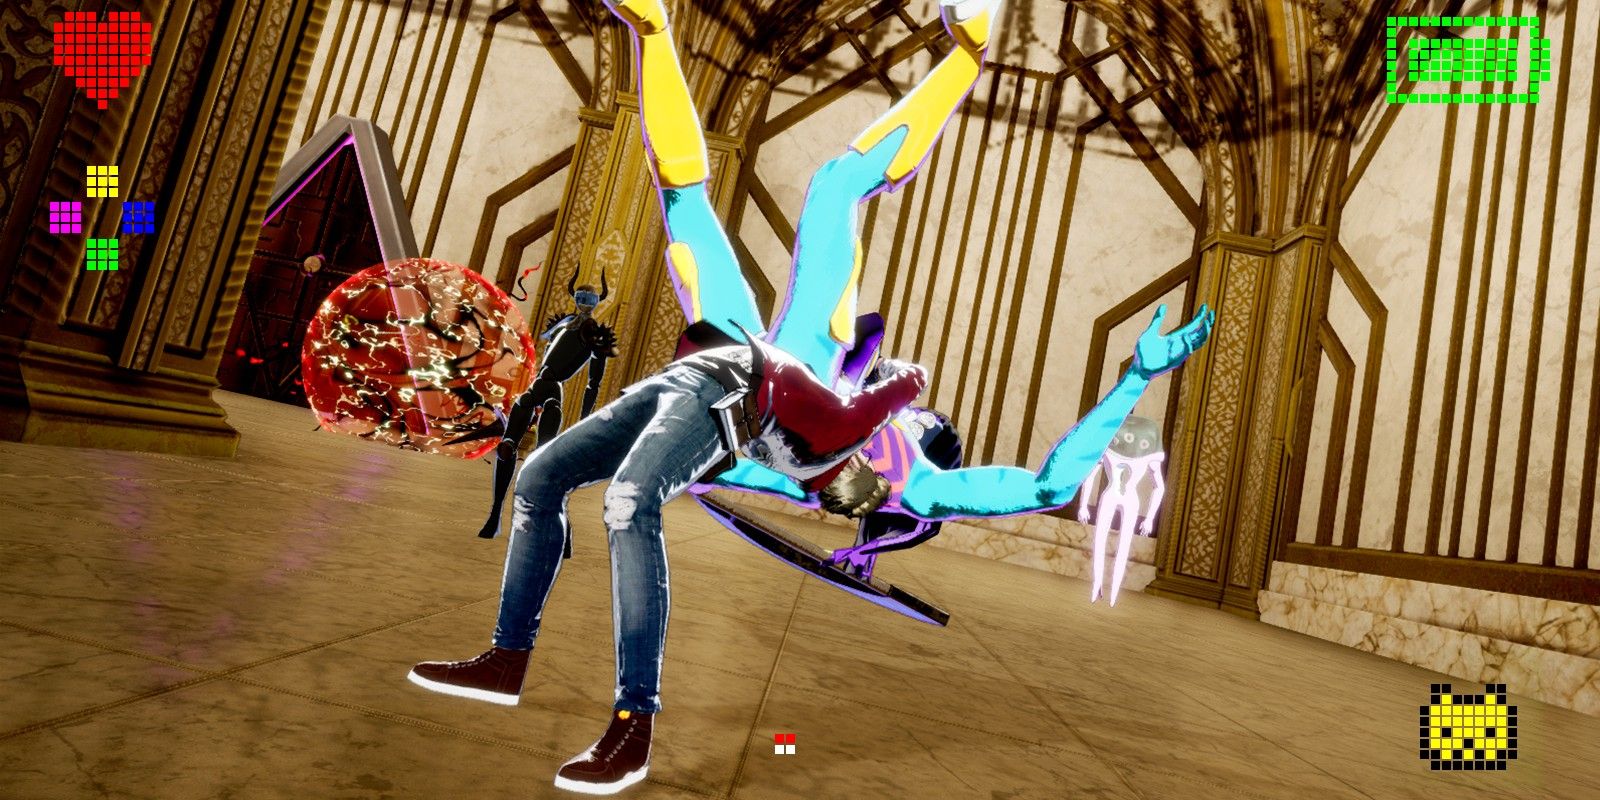 Travis suplexes an enemy in No More Heroes 3.